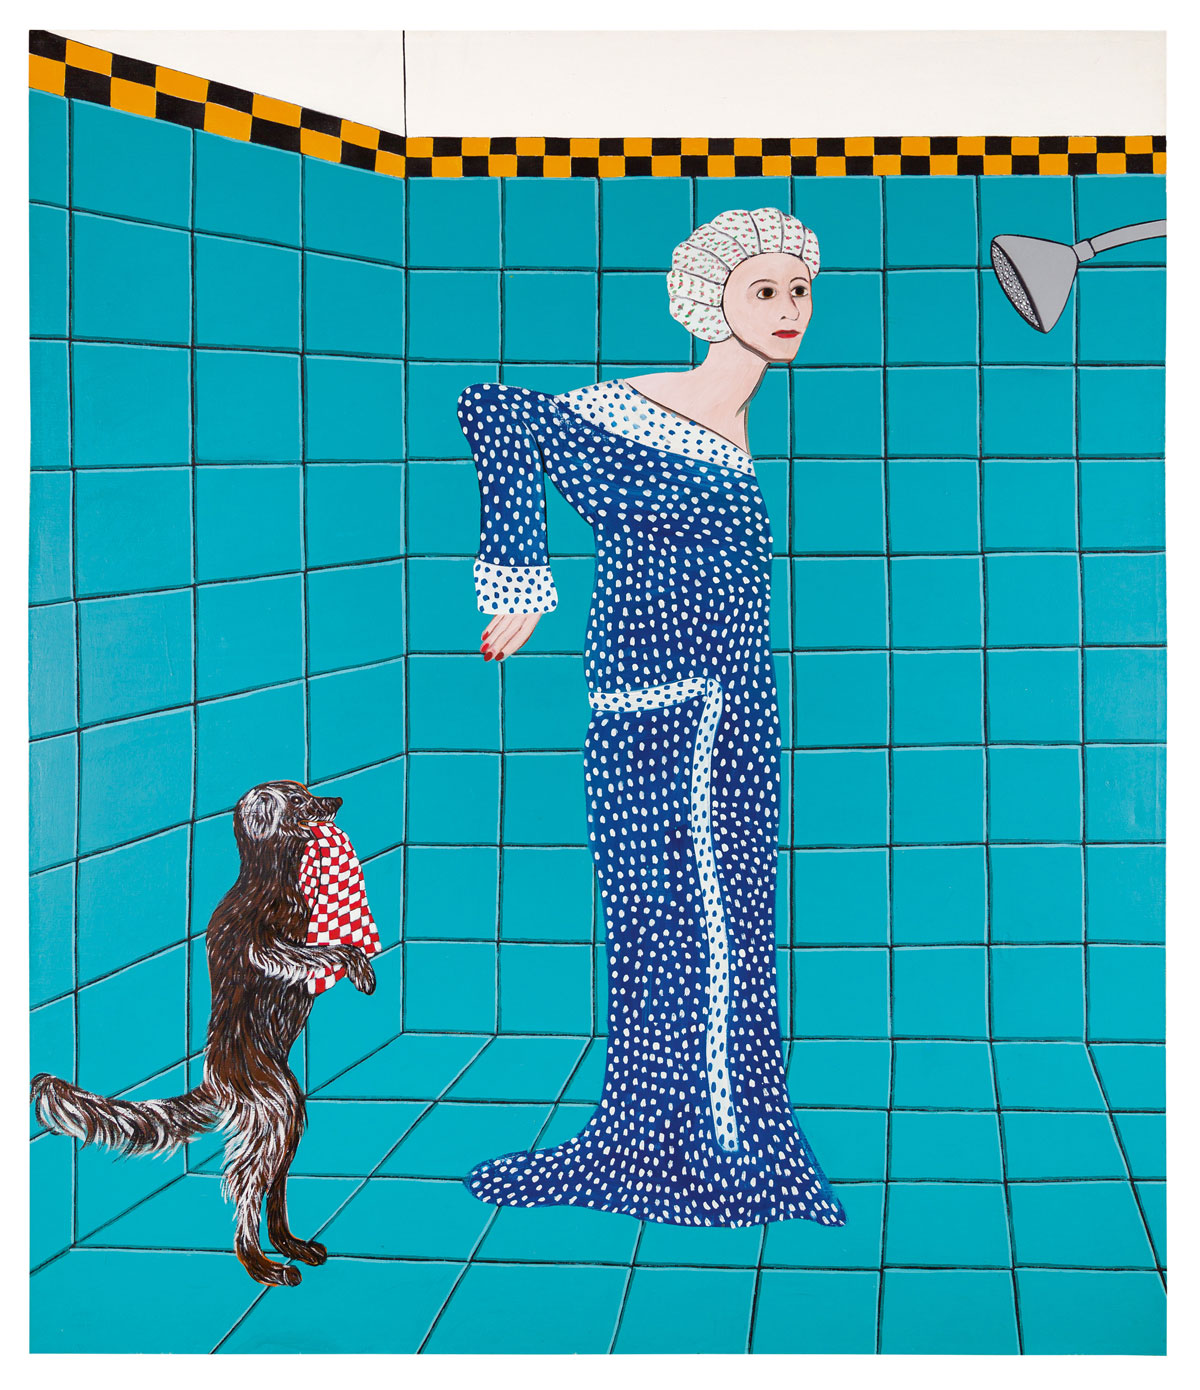 Painting of a woman in a bathrobe in a shower cap in a turquoise tiled shower, a dog stands behind her